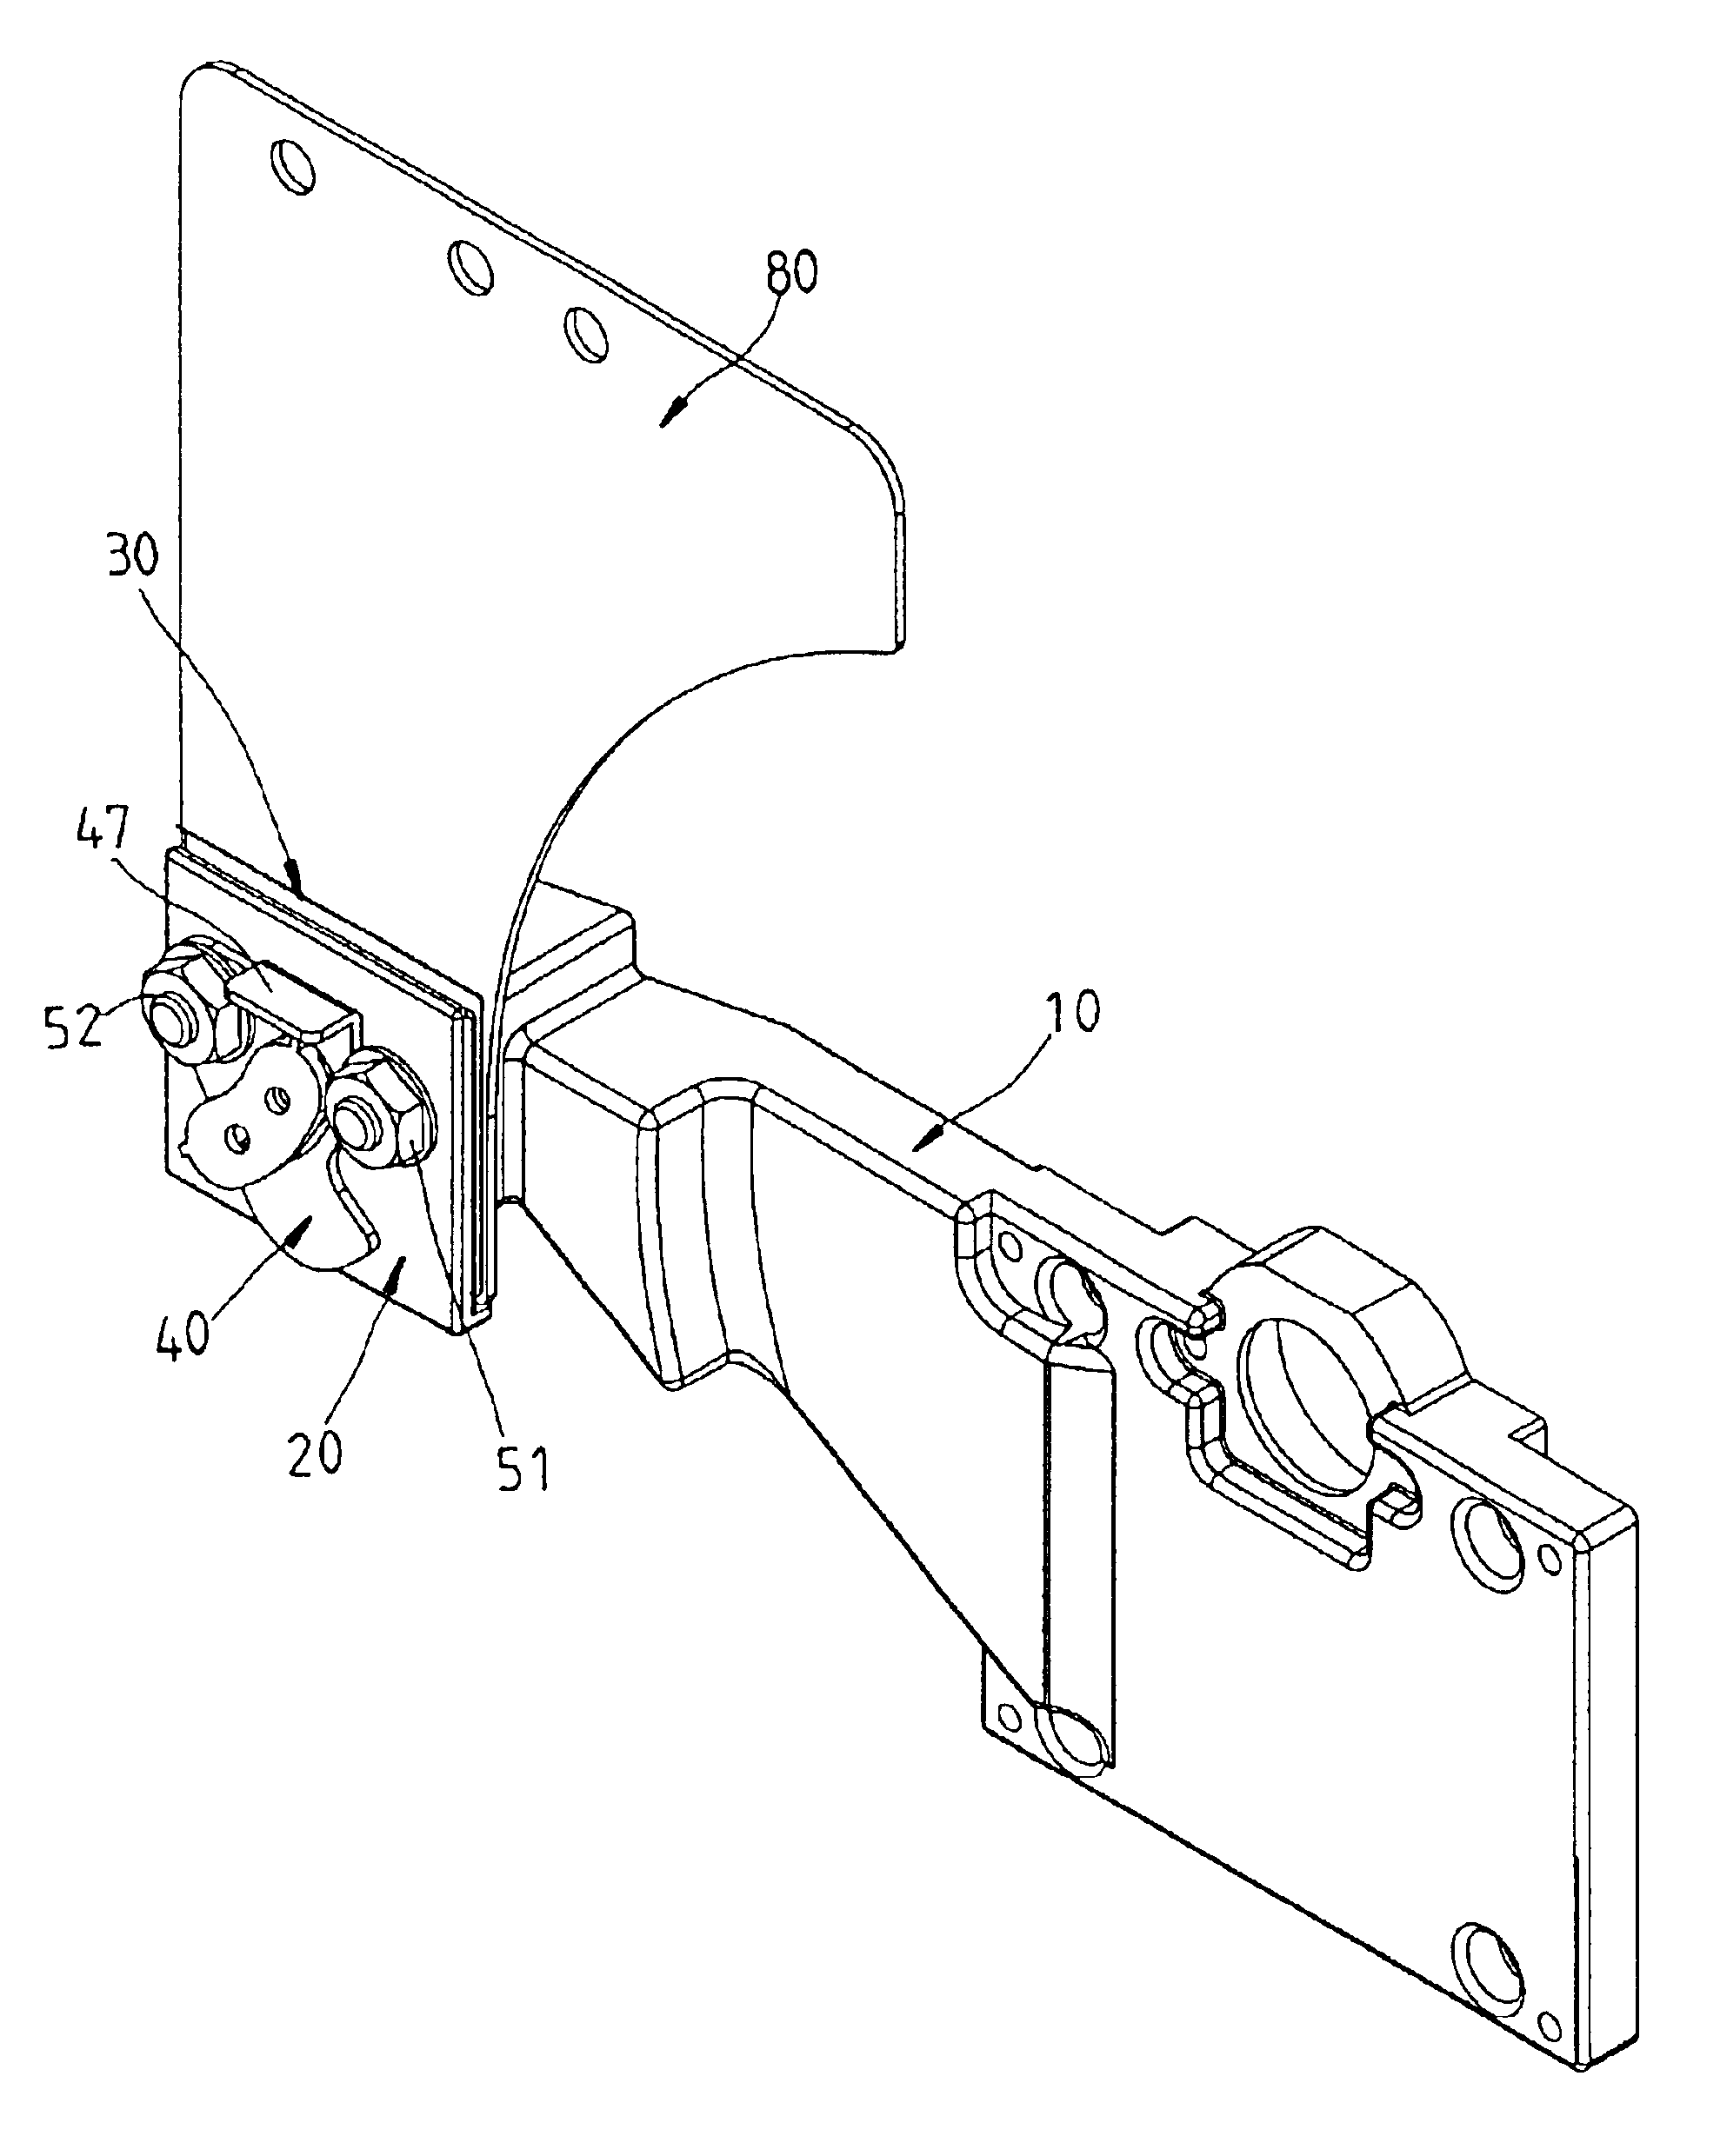 Quick-detachable blade guard mounting structure